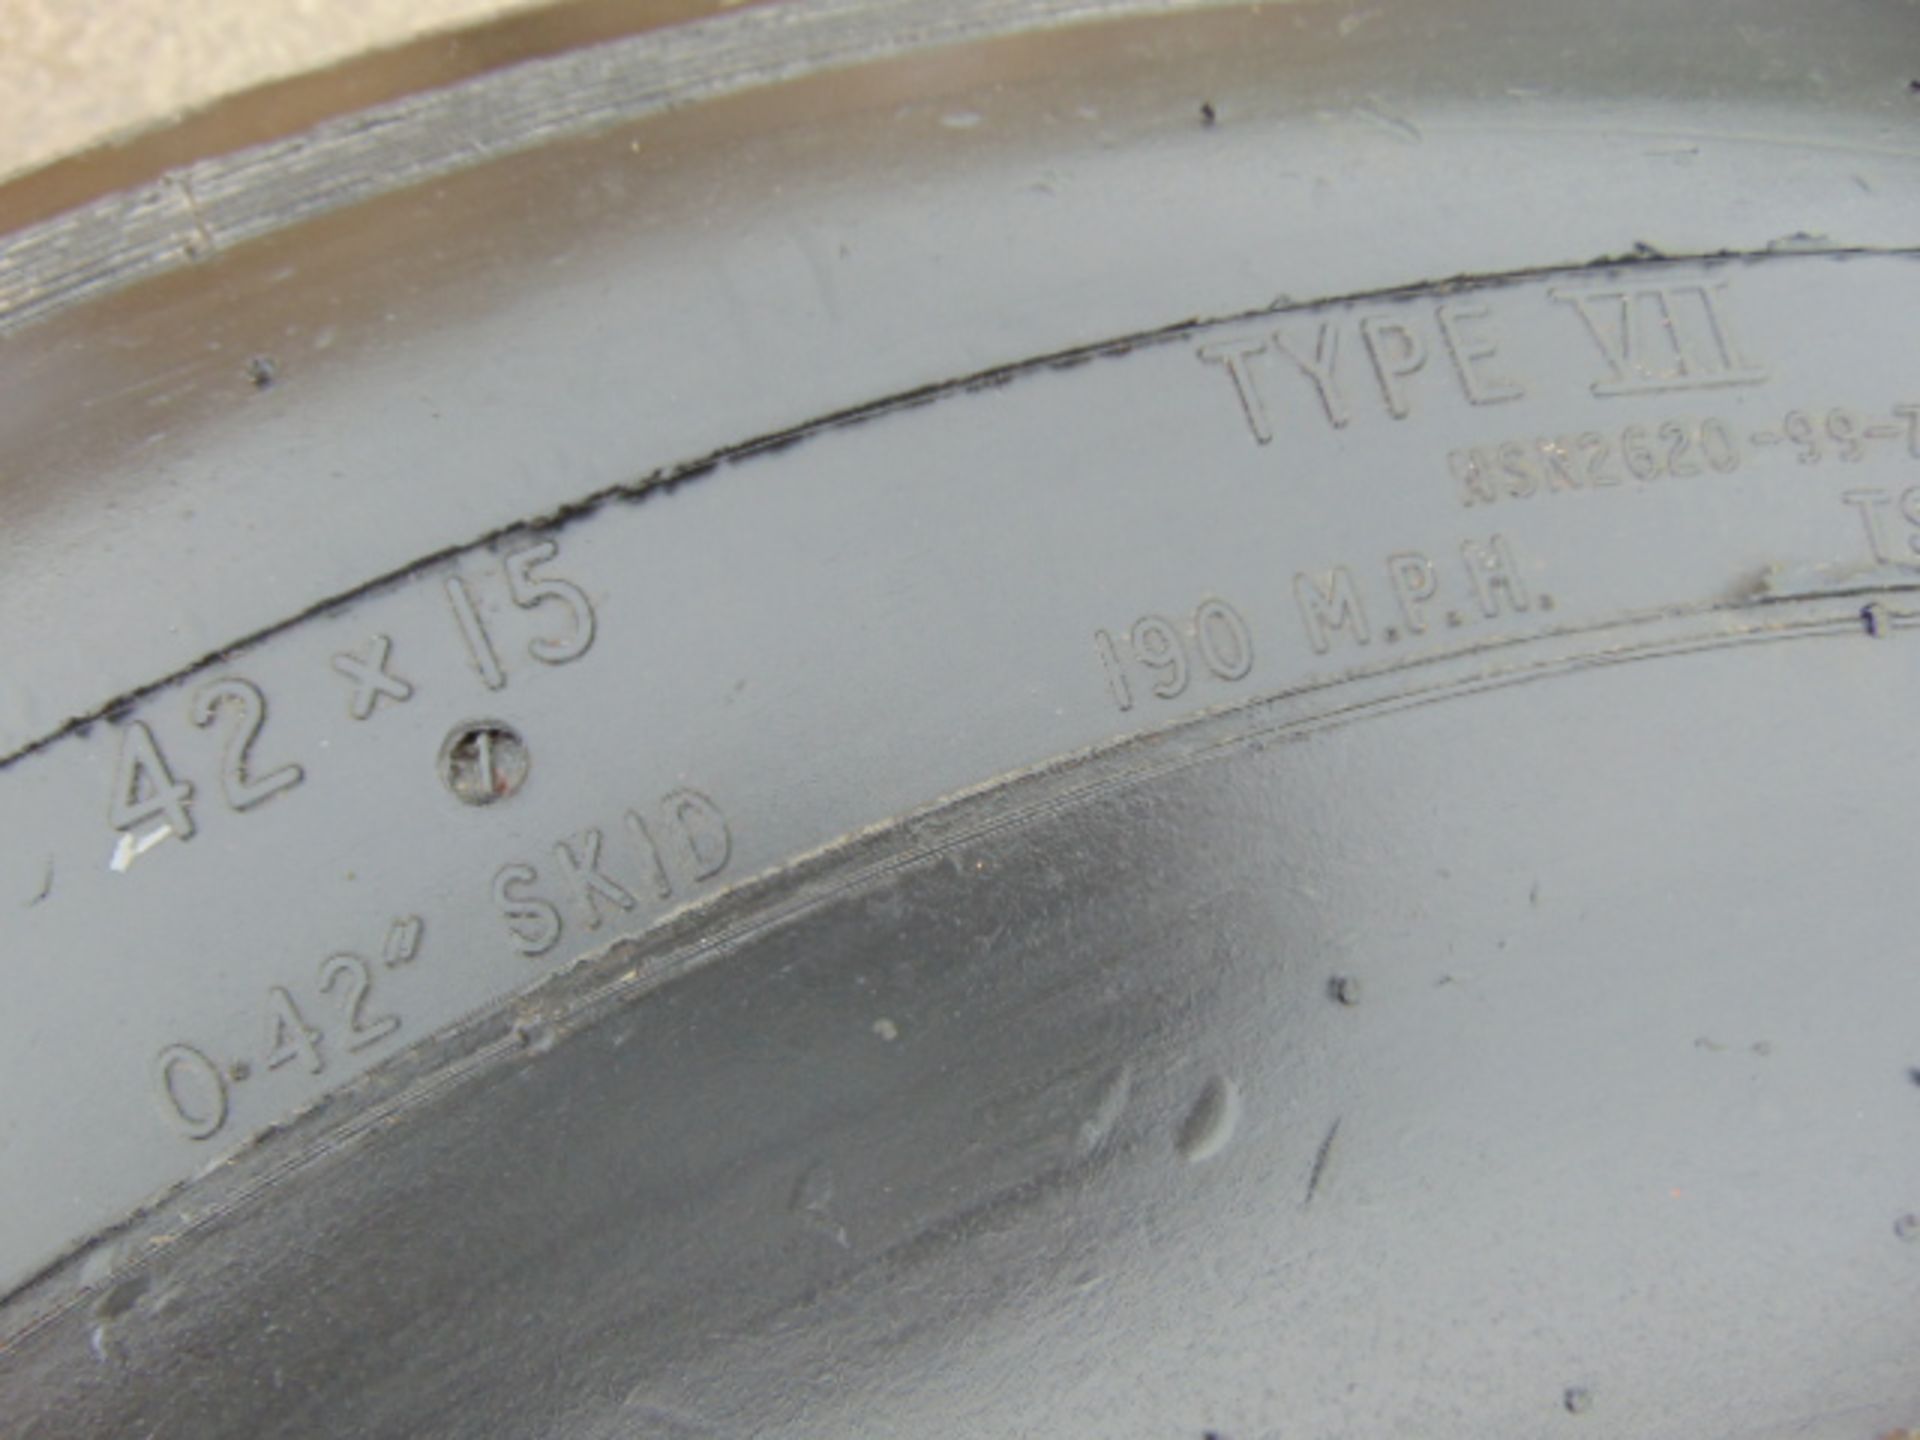 Dunlop CR-4 VC10 Aircraft Tyre - Image 4 of 5